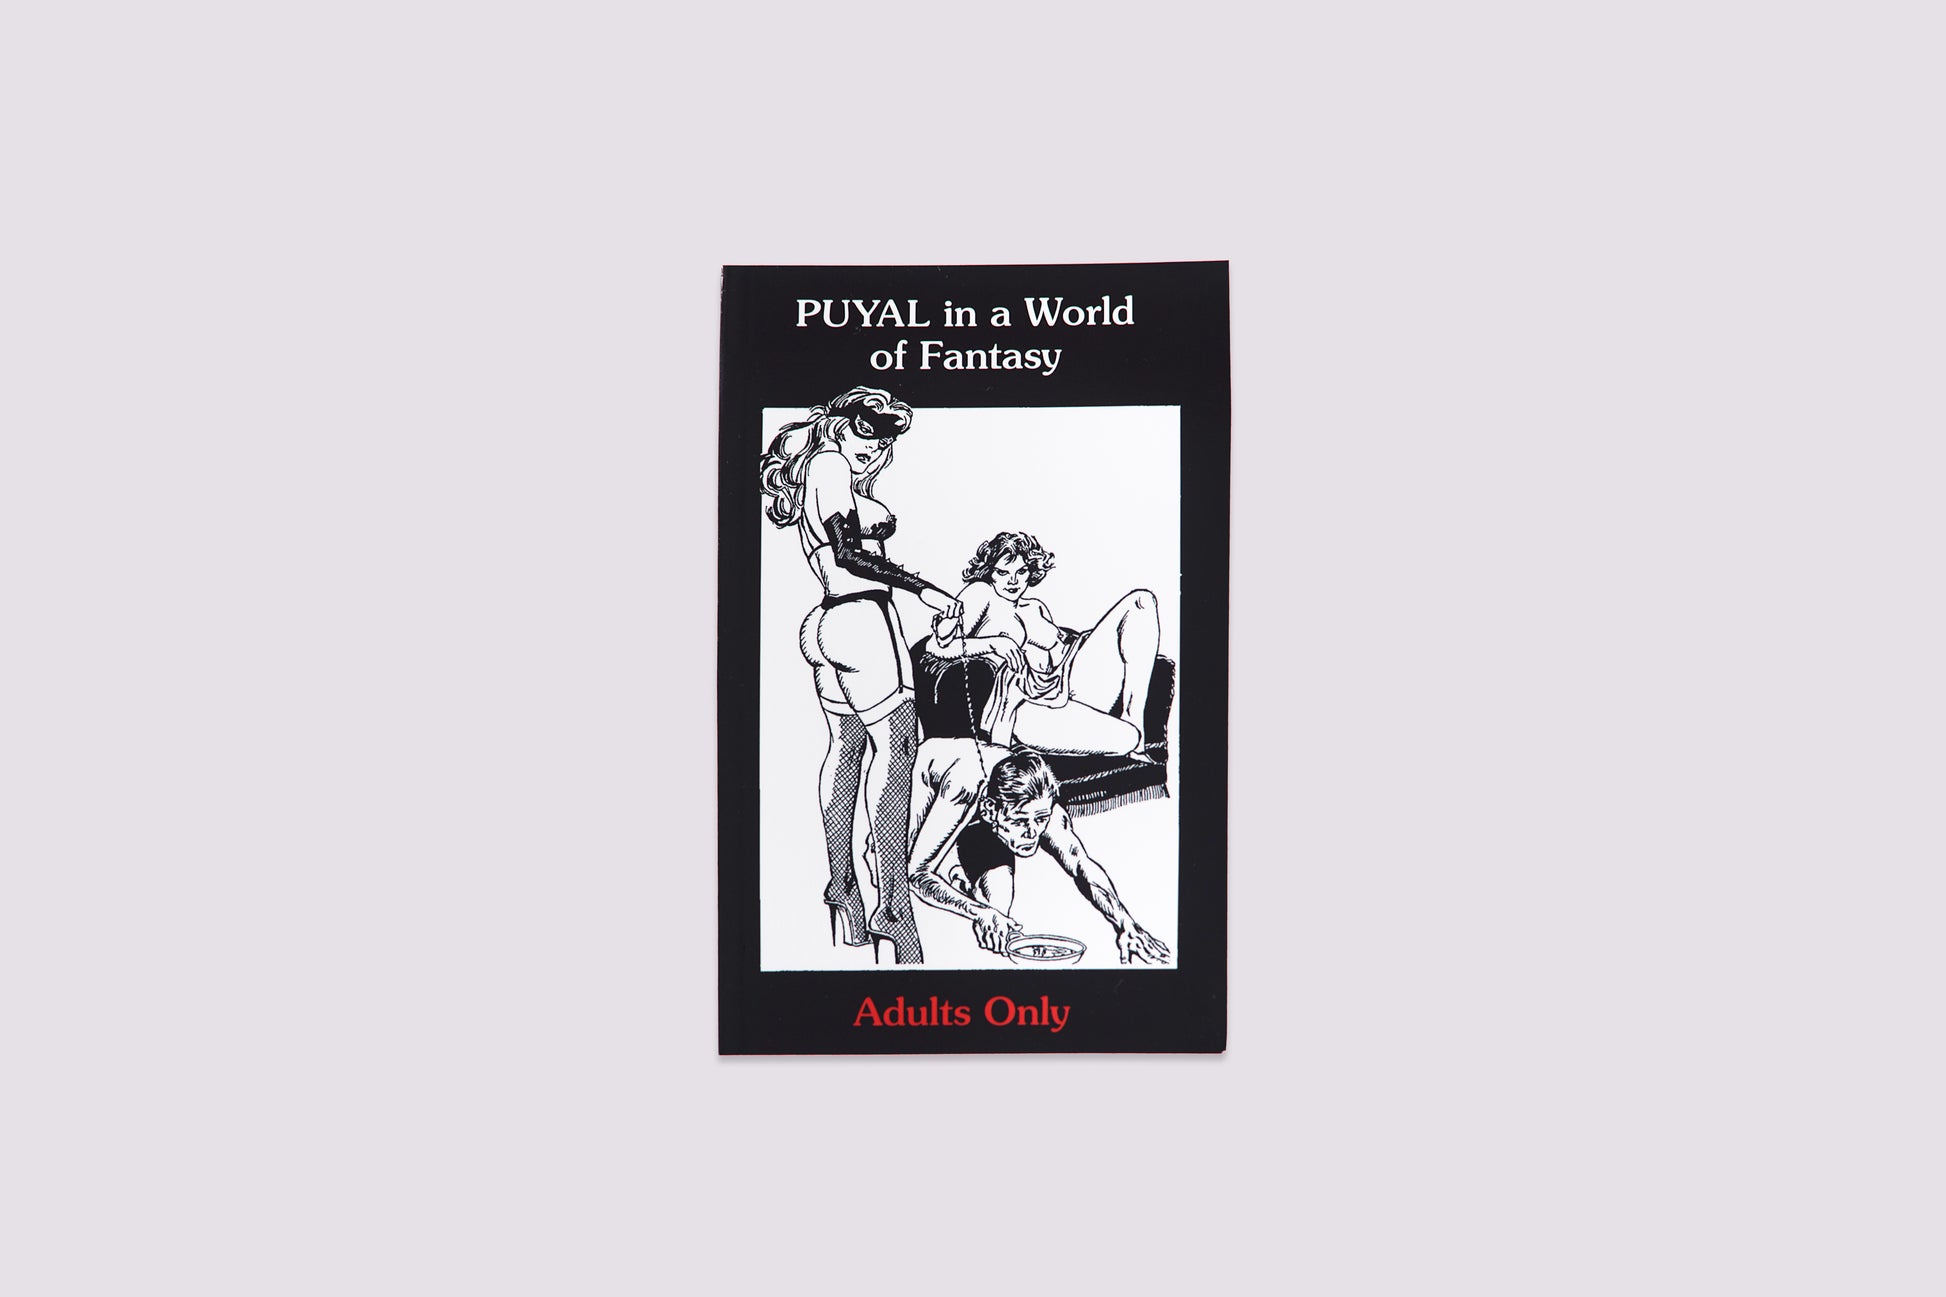 Puyal in a Fantasy World/Juan S. Puyal published by OMMU Books